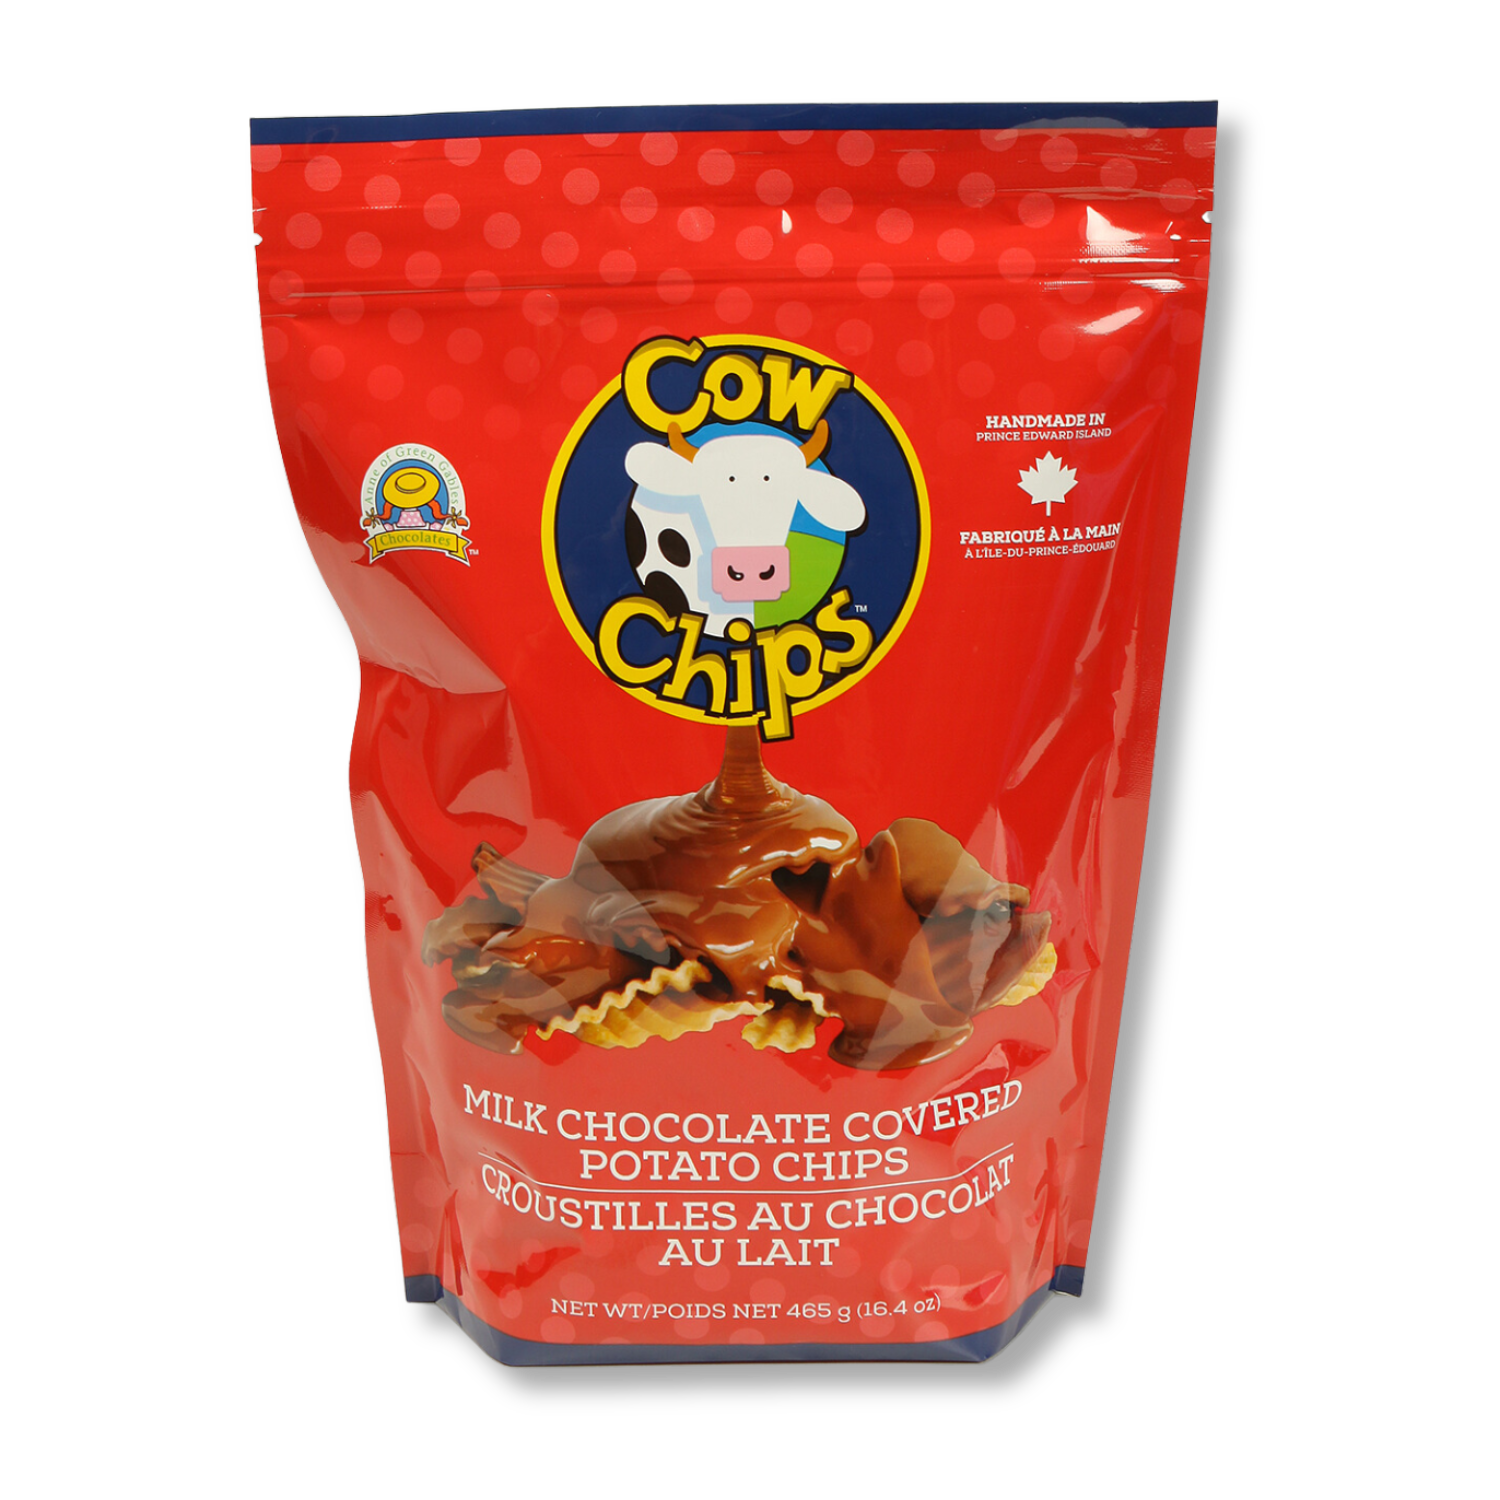 COW Chips - Limited Edition Bag